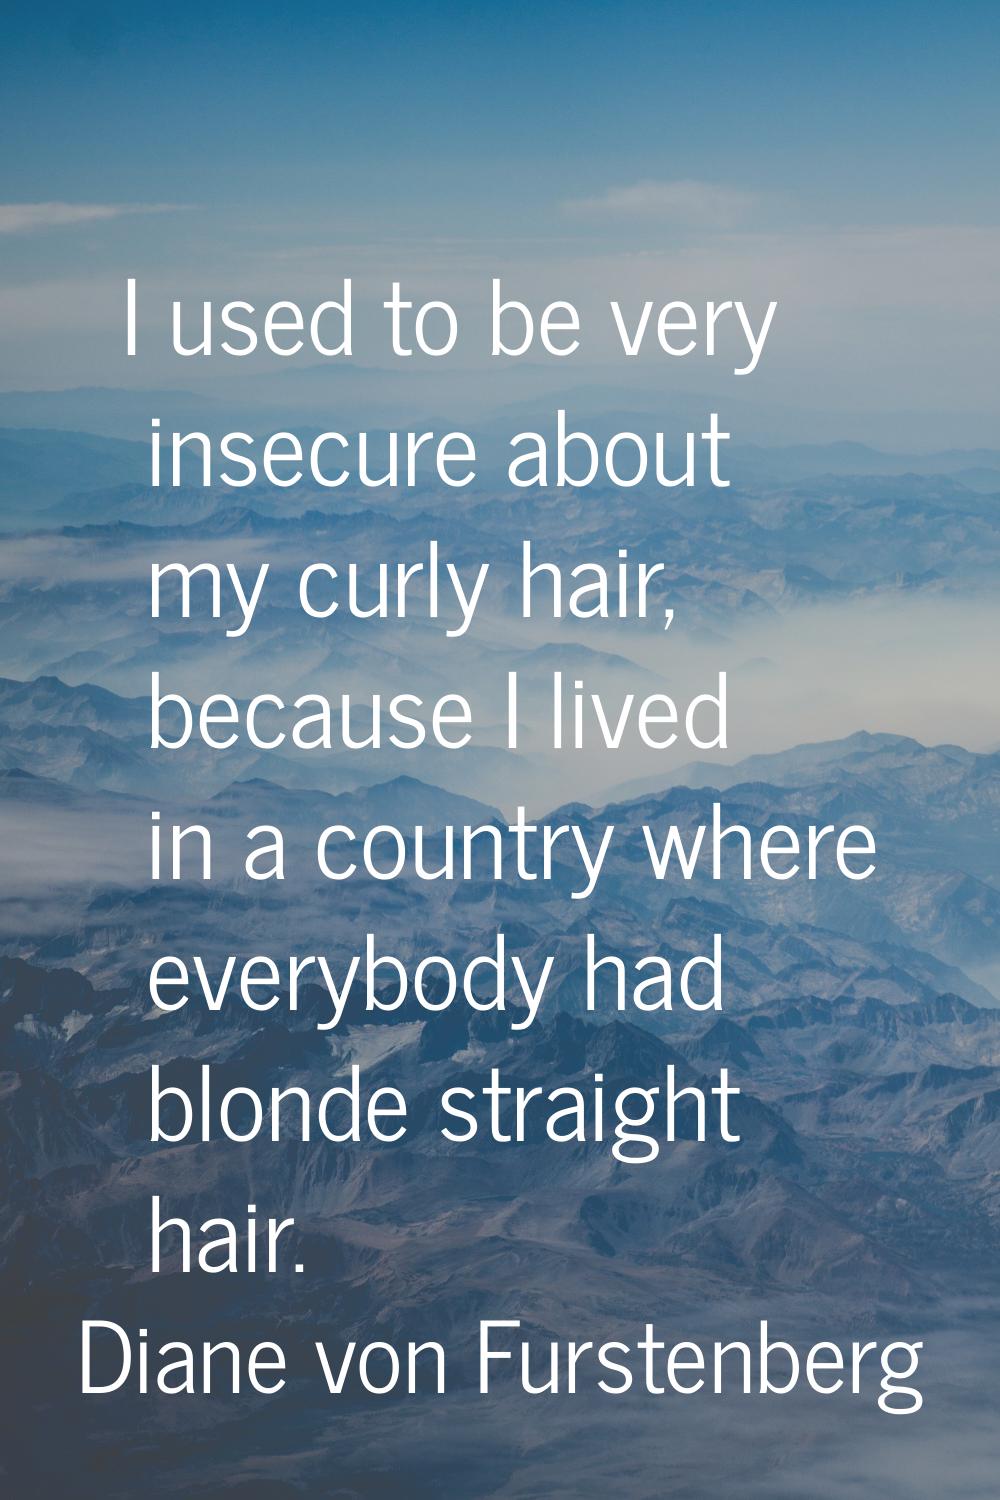 I used to be very insecure about my curly hair, because I lived in a country where everybody had bl